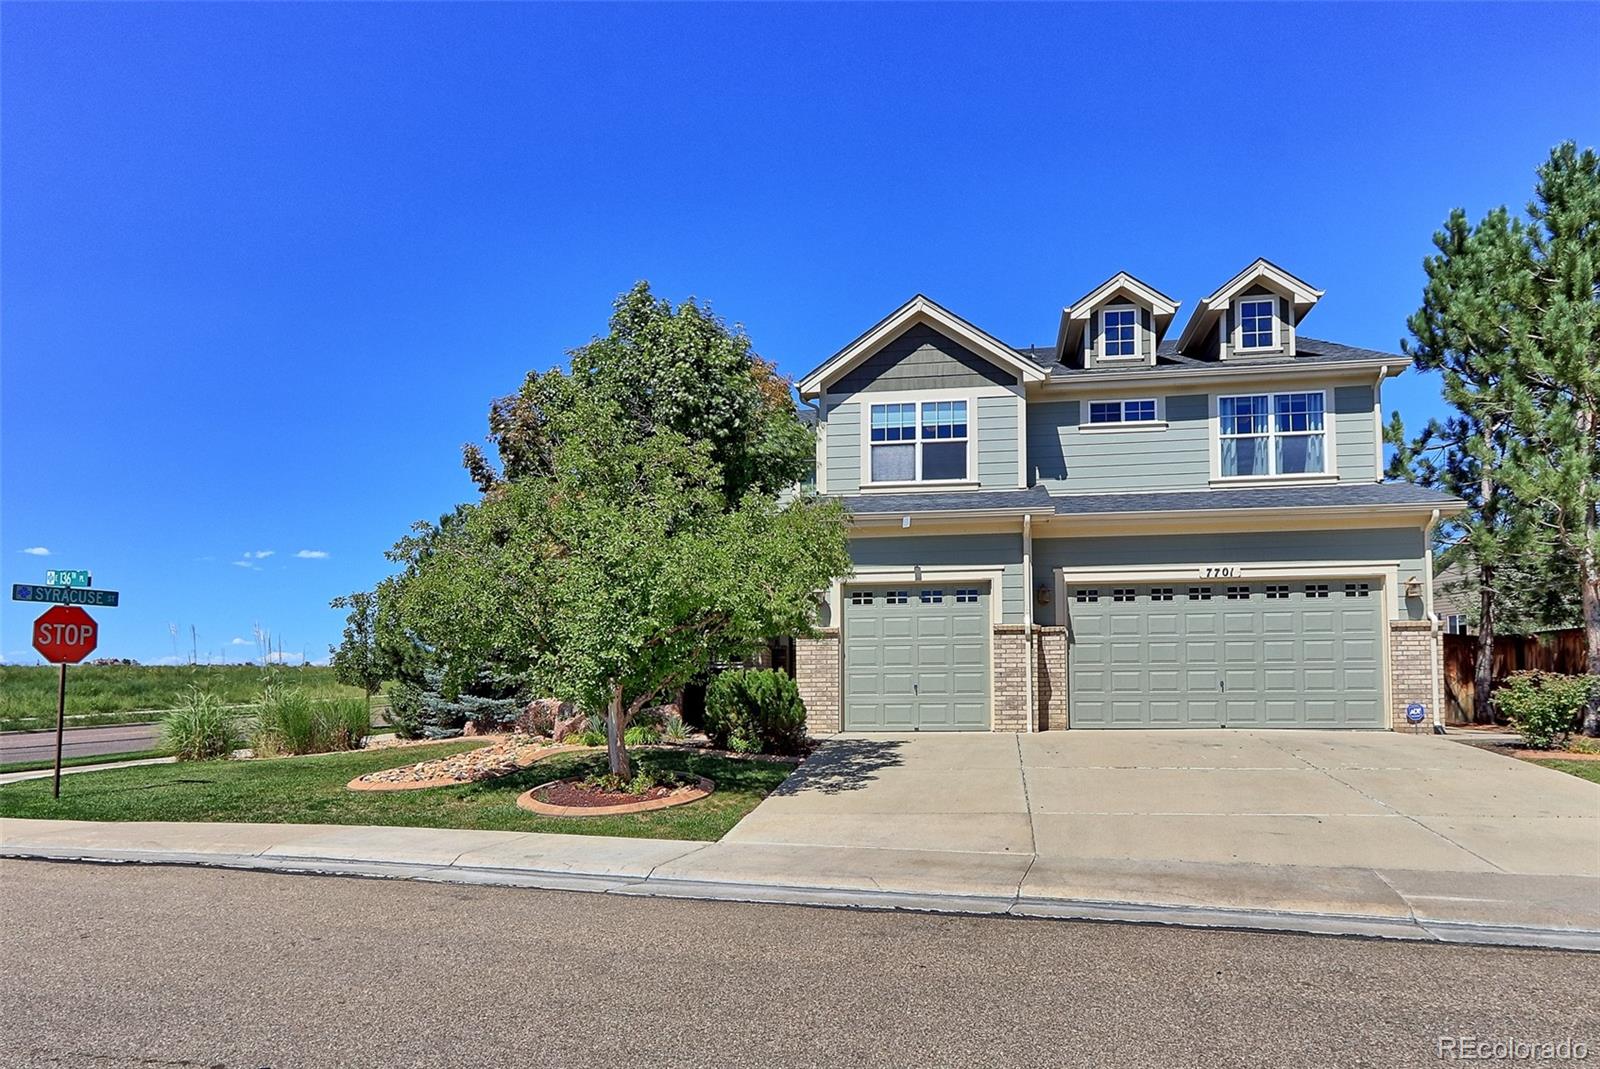 7701 E 136th Place, thornton MLS: 5867268 Beds: 6 Baths: 4 Price: $750,000